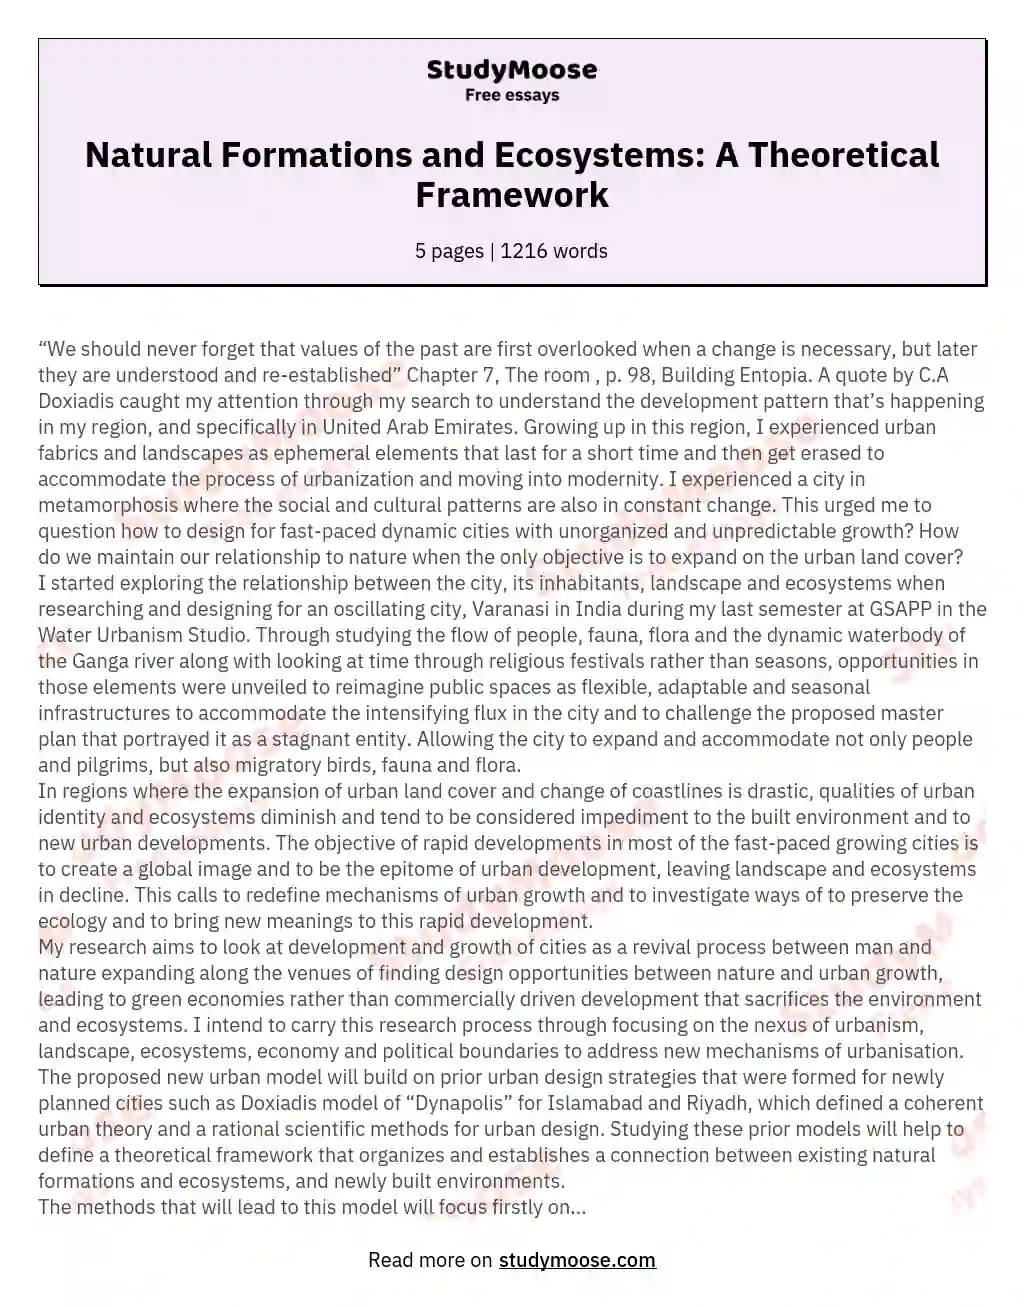 Natural Formations and Ecosystems: A Theoretical Framework essay